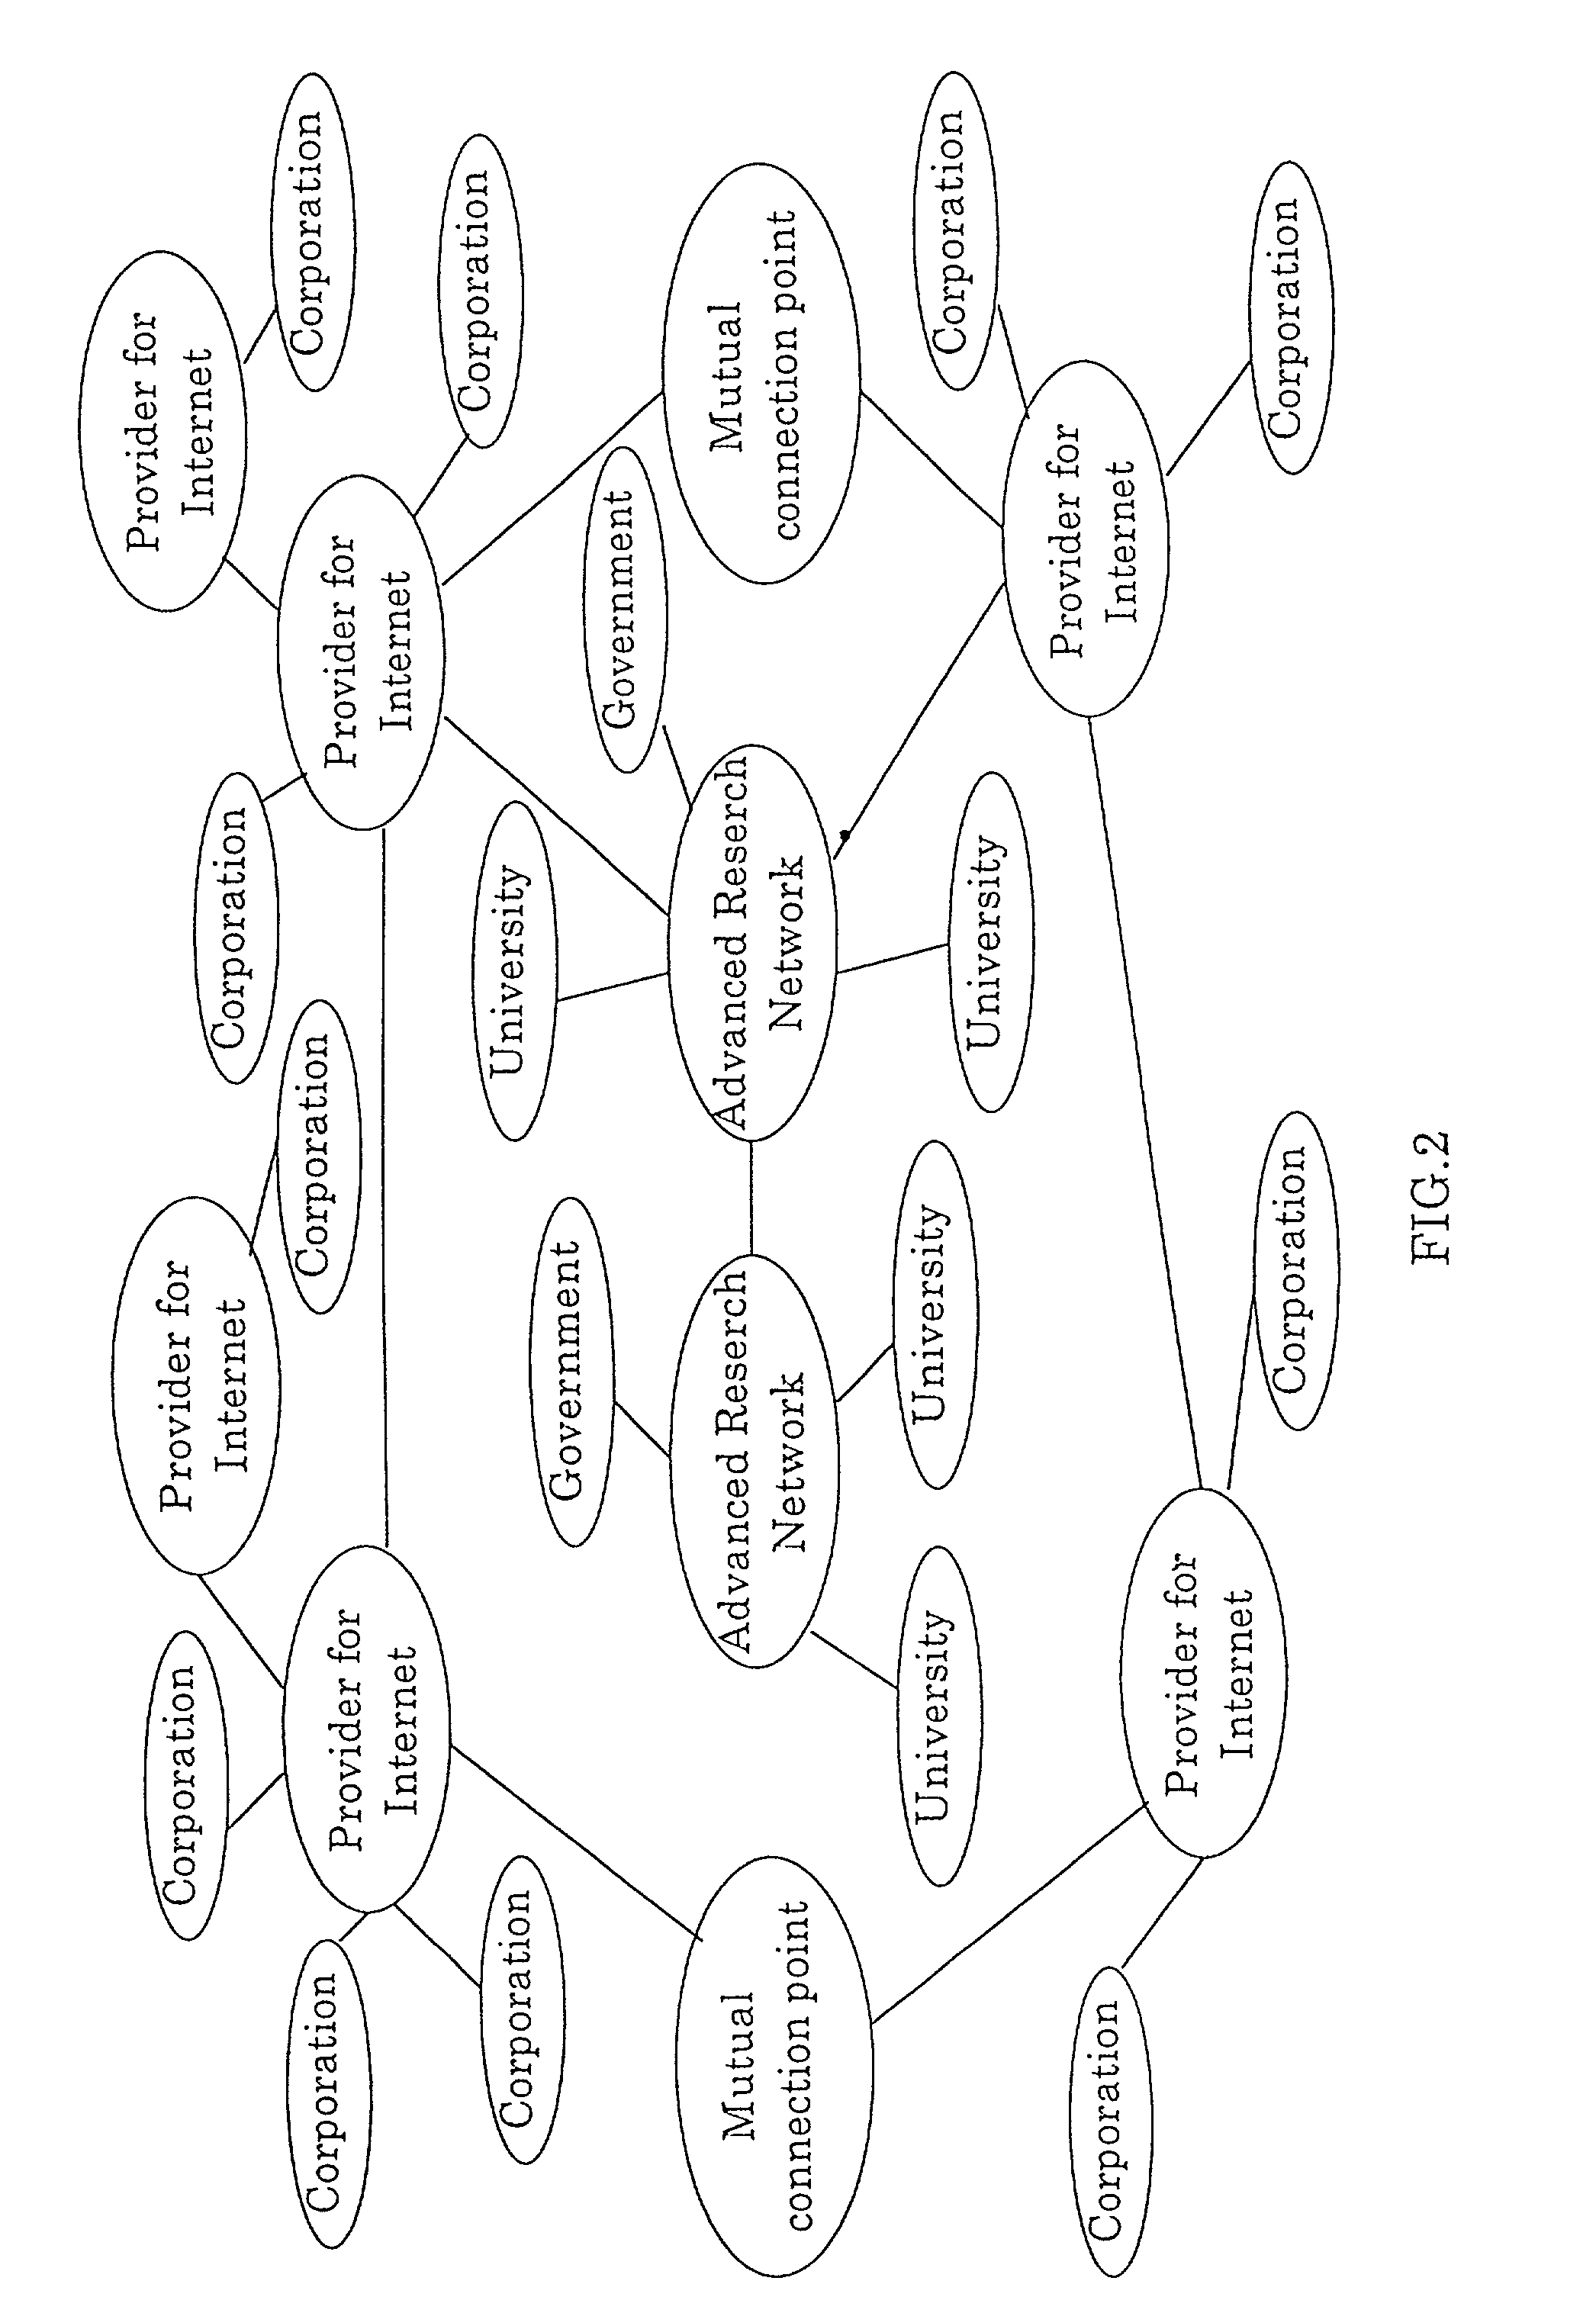 Integrated information communication system using internet protocol